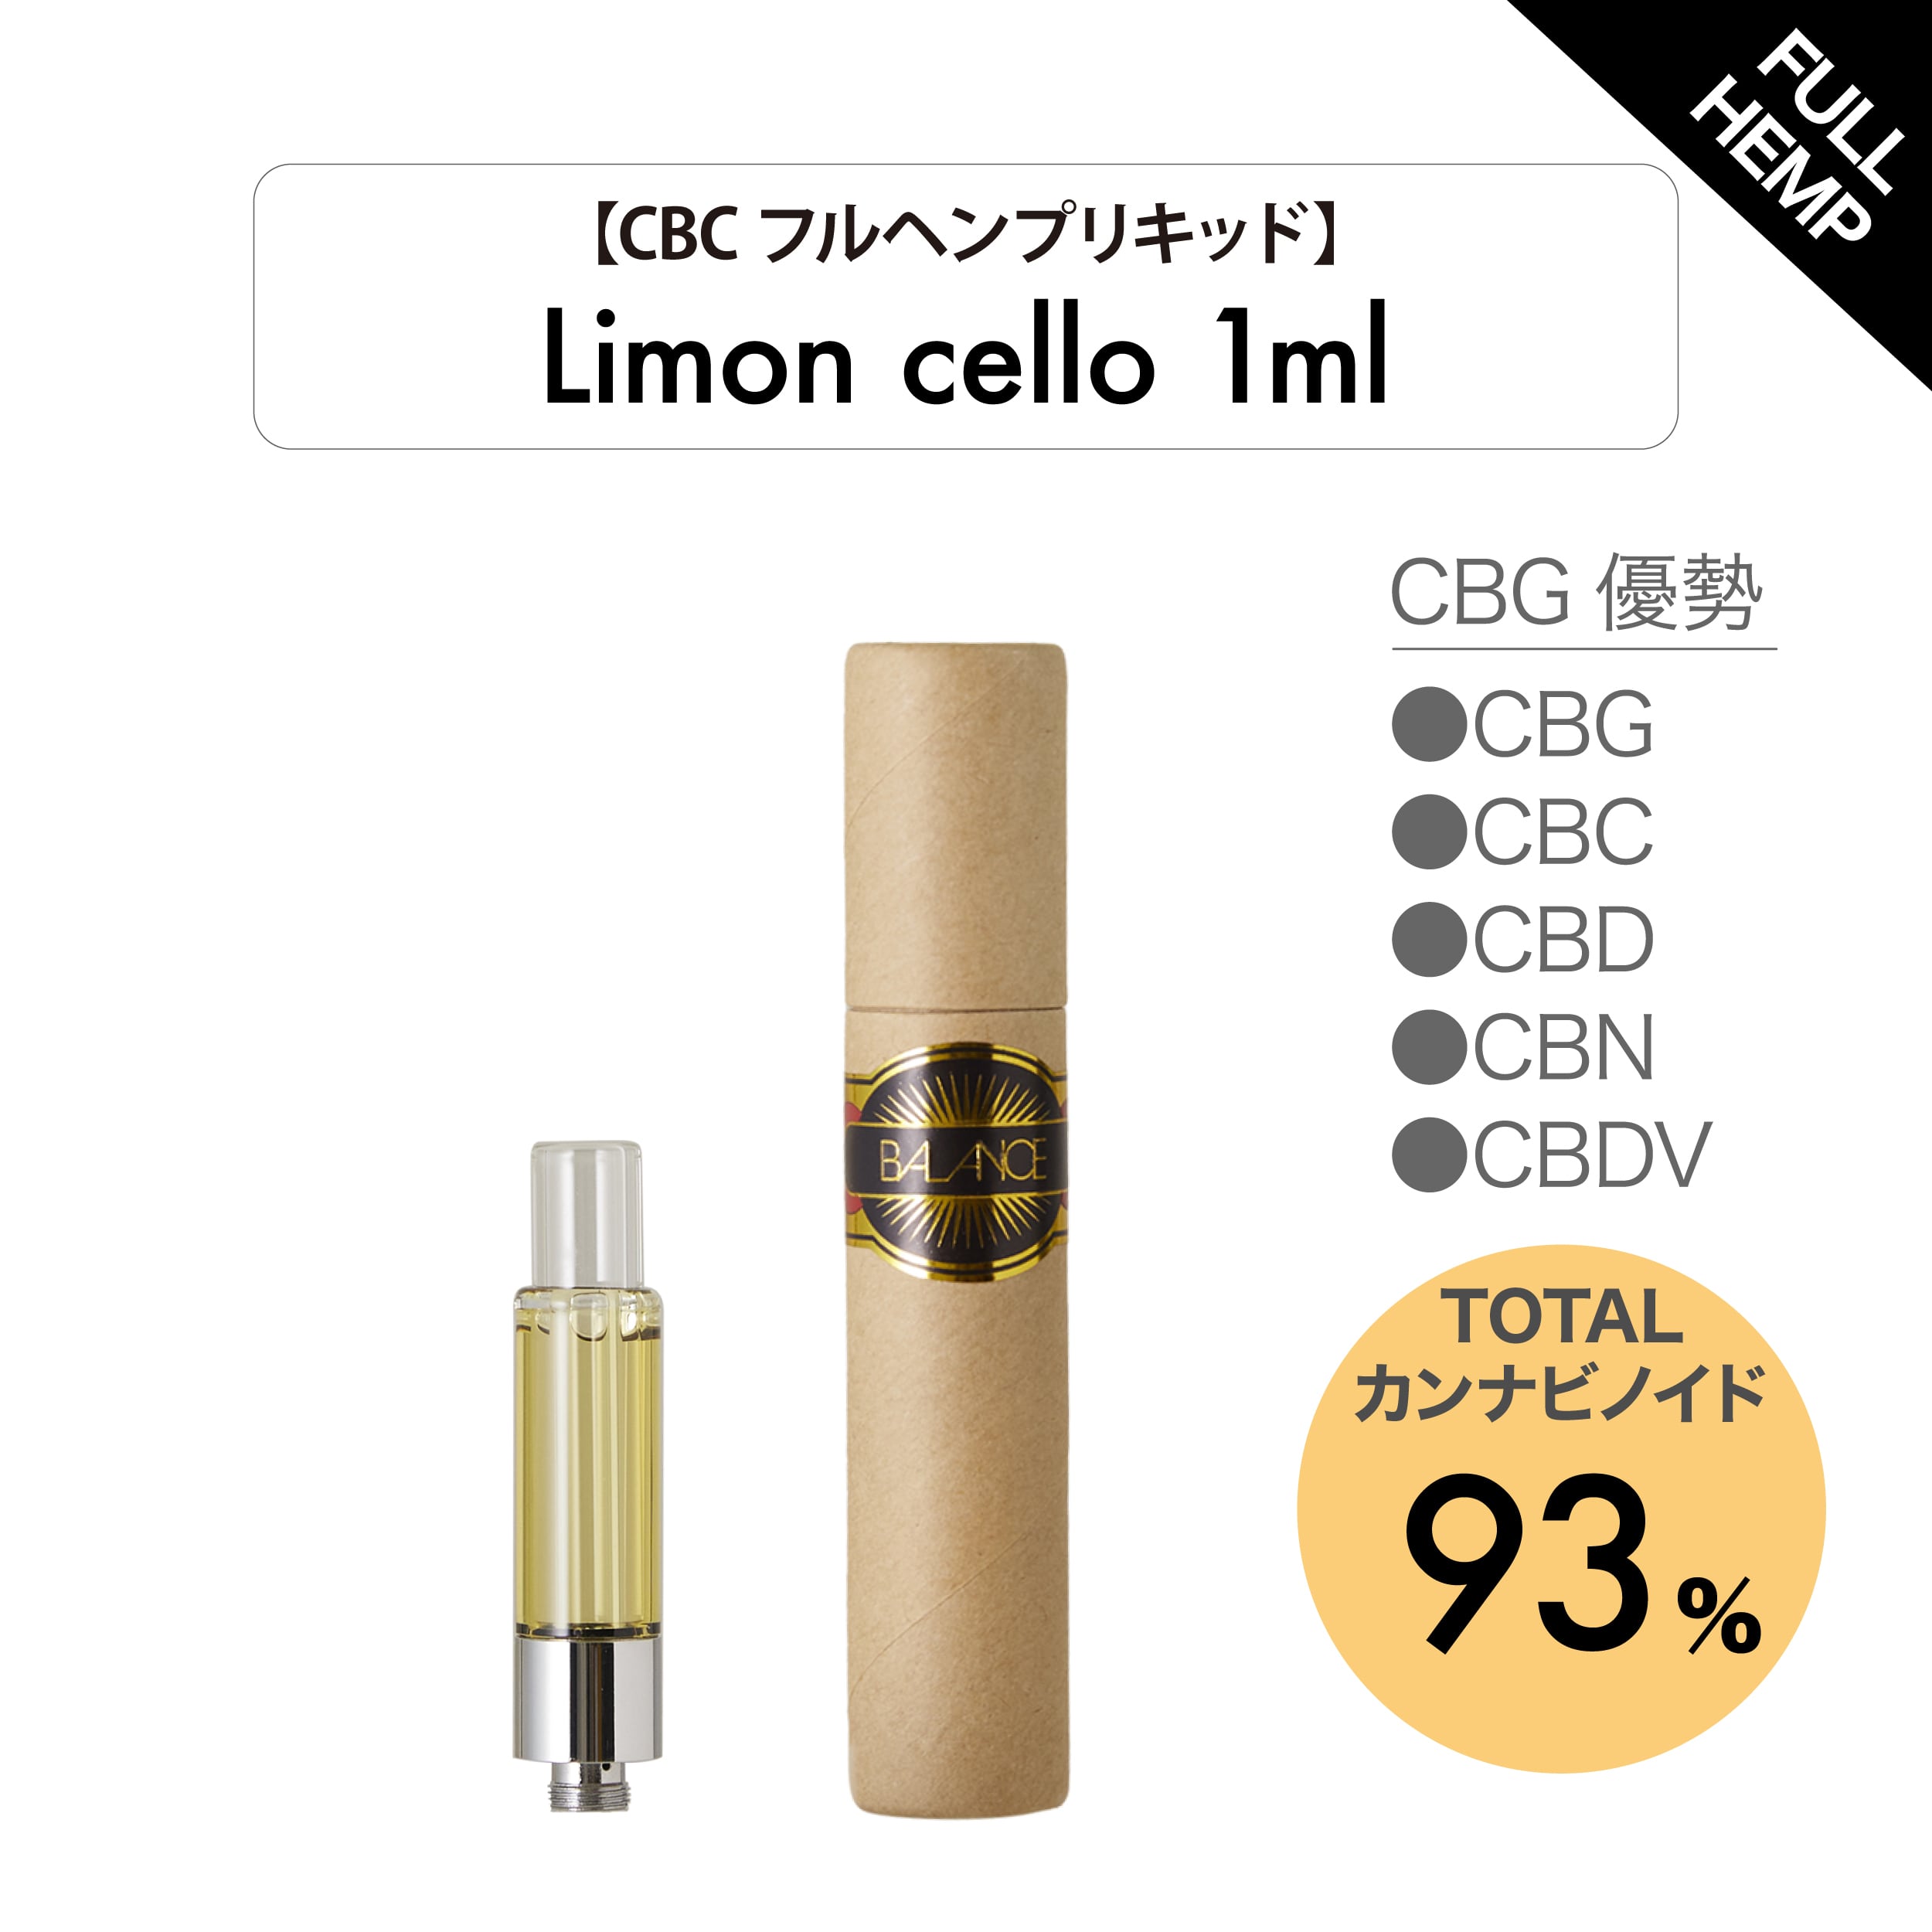 HAPPYリキッド1本 1.0ml CRD CRDP CRD CBN @28